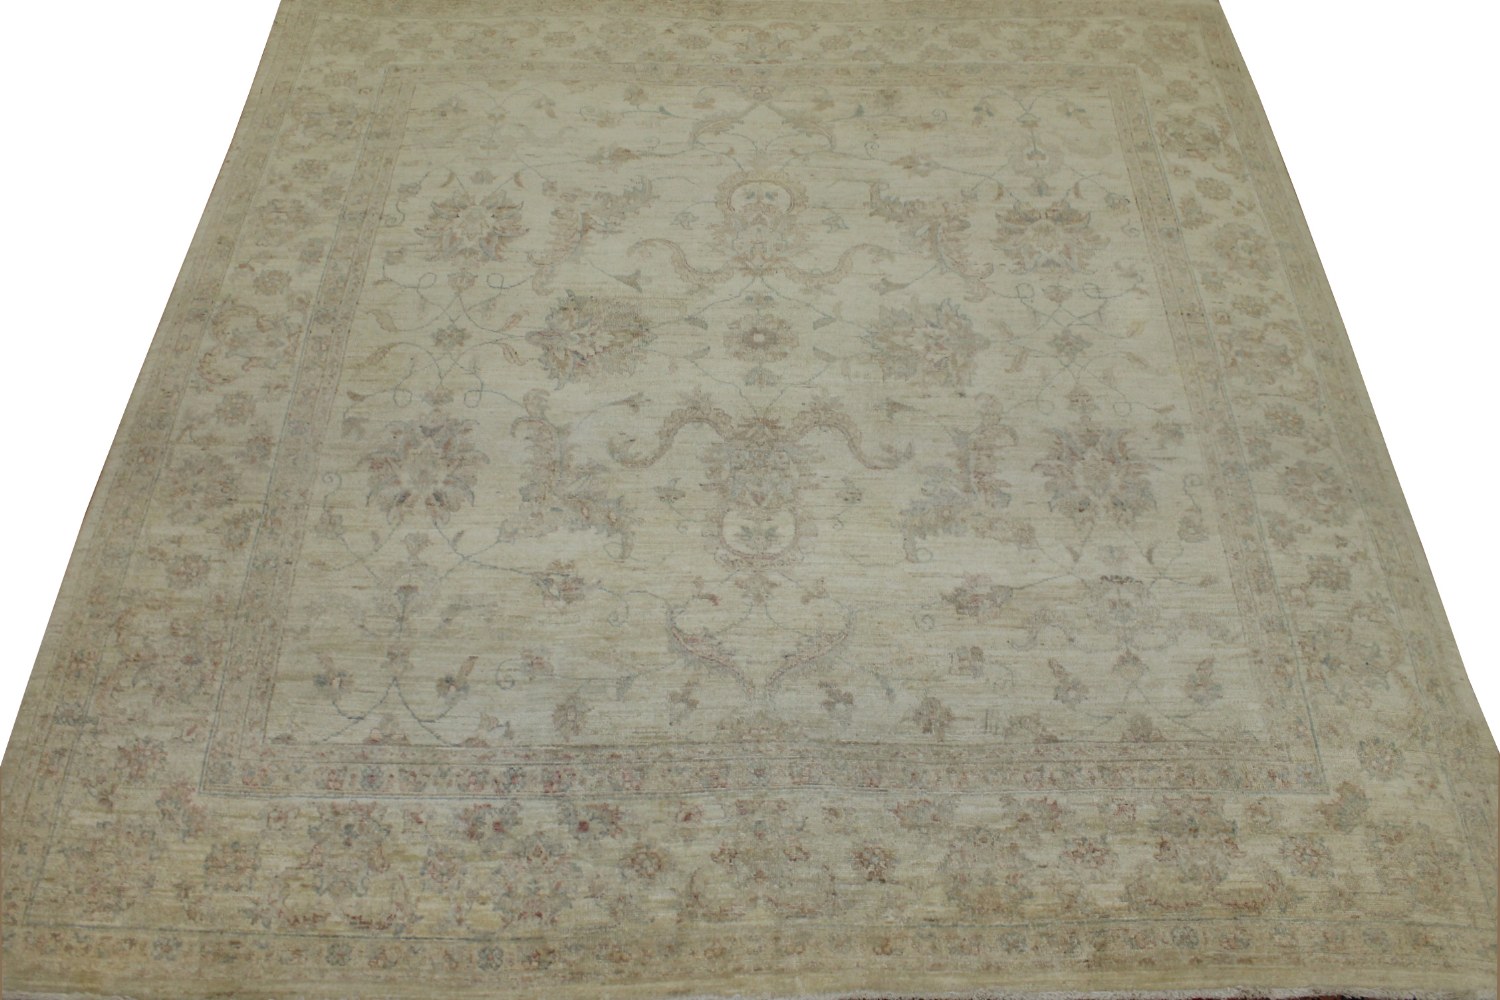 8 ft. Round & Square Peshawar Hand Knotted Wool Area Rug - MR014983